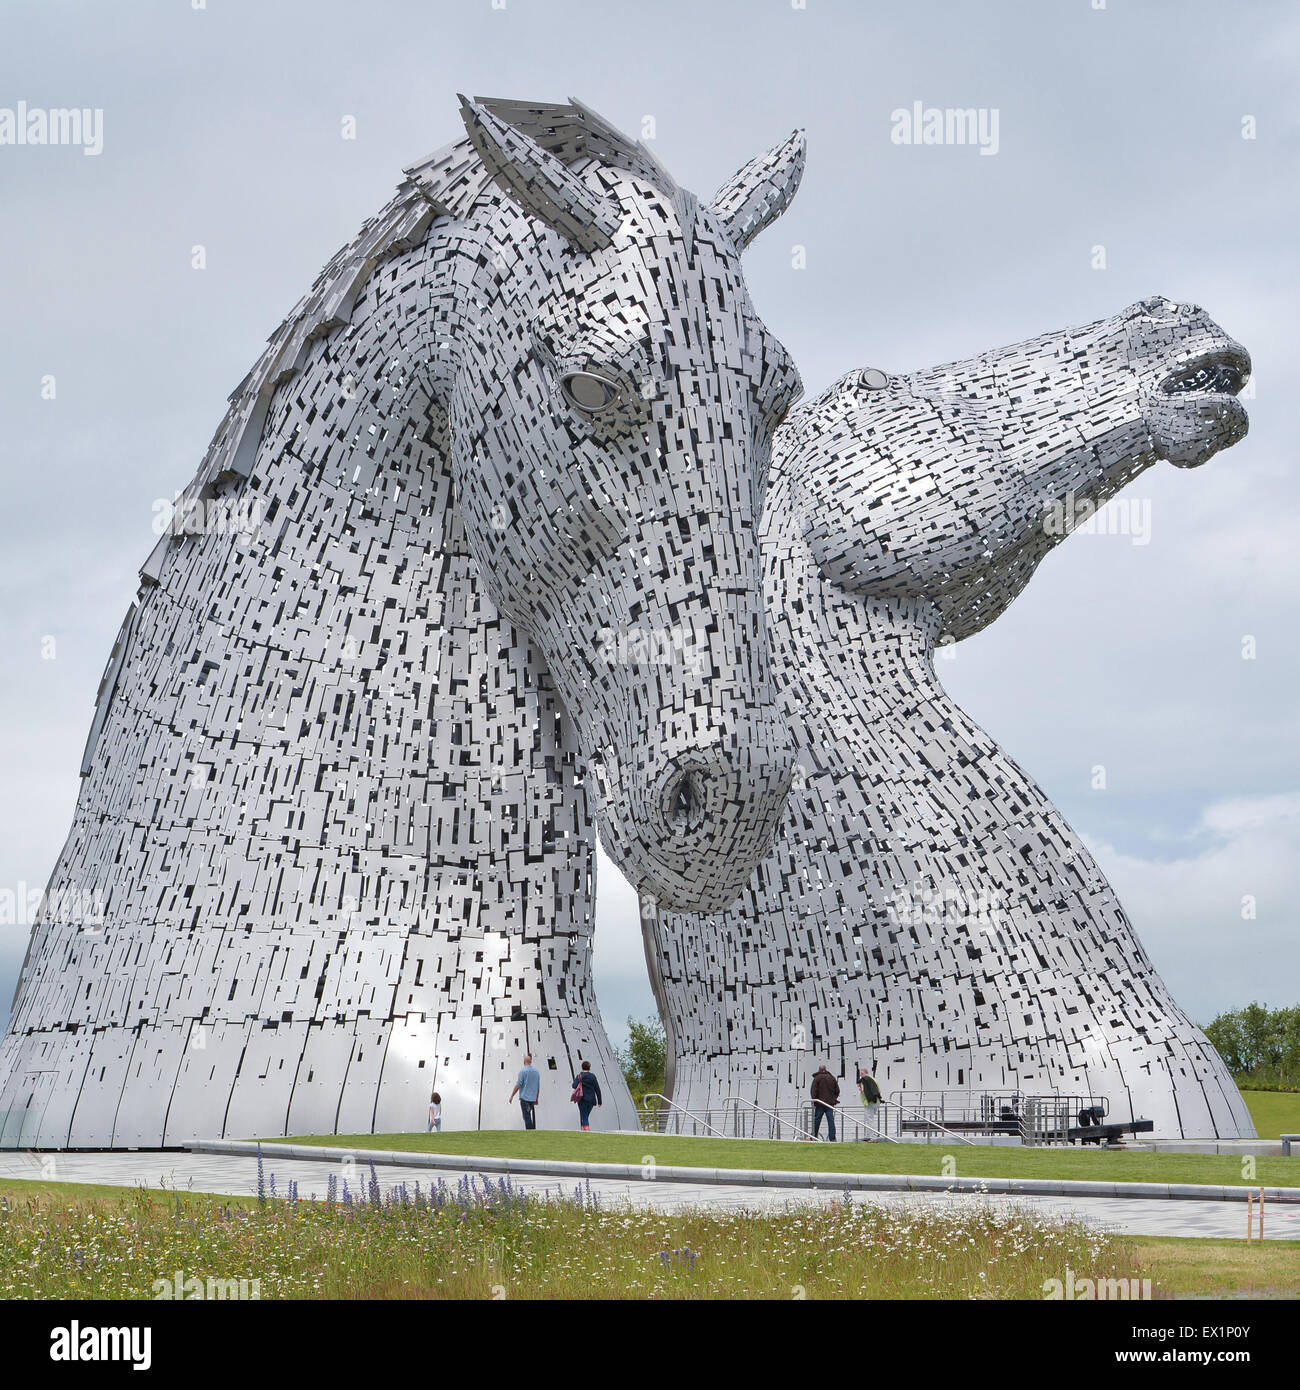 Visitors dwarfed by The Kelpies - giant equine sculptures in Falkirk, Scotland by artist Andy Scott Stock Photo